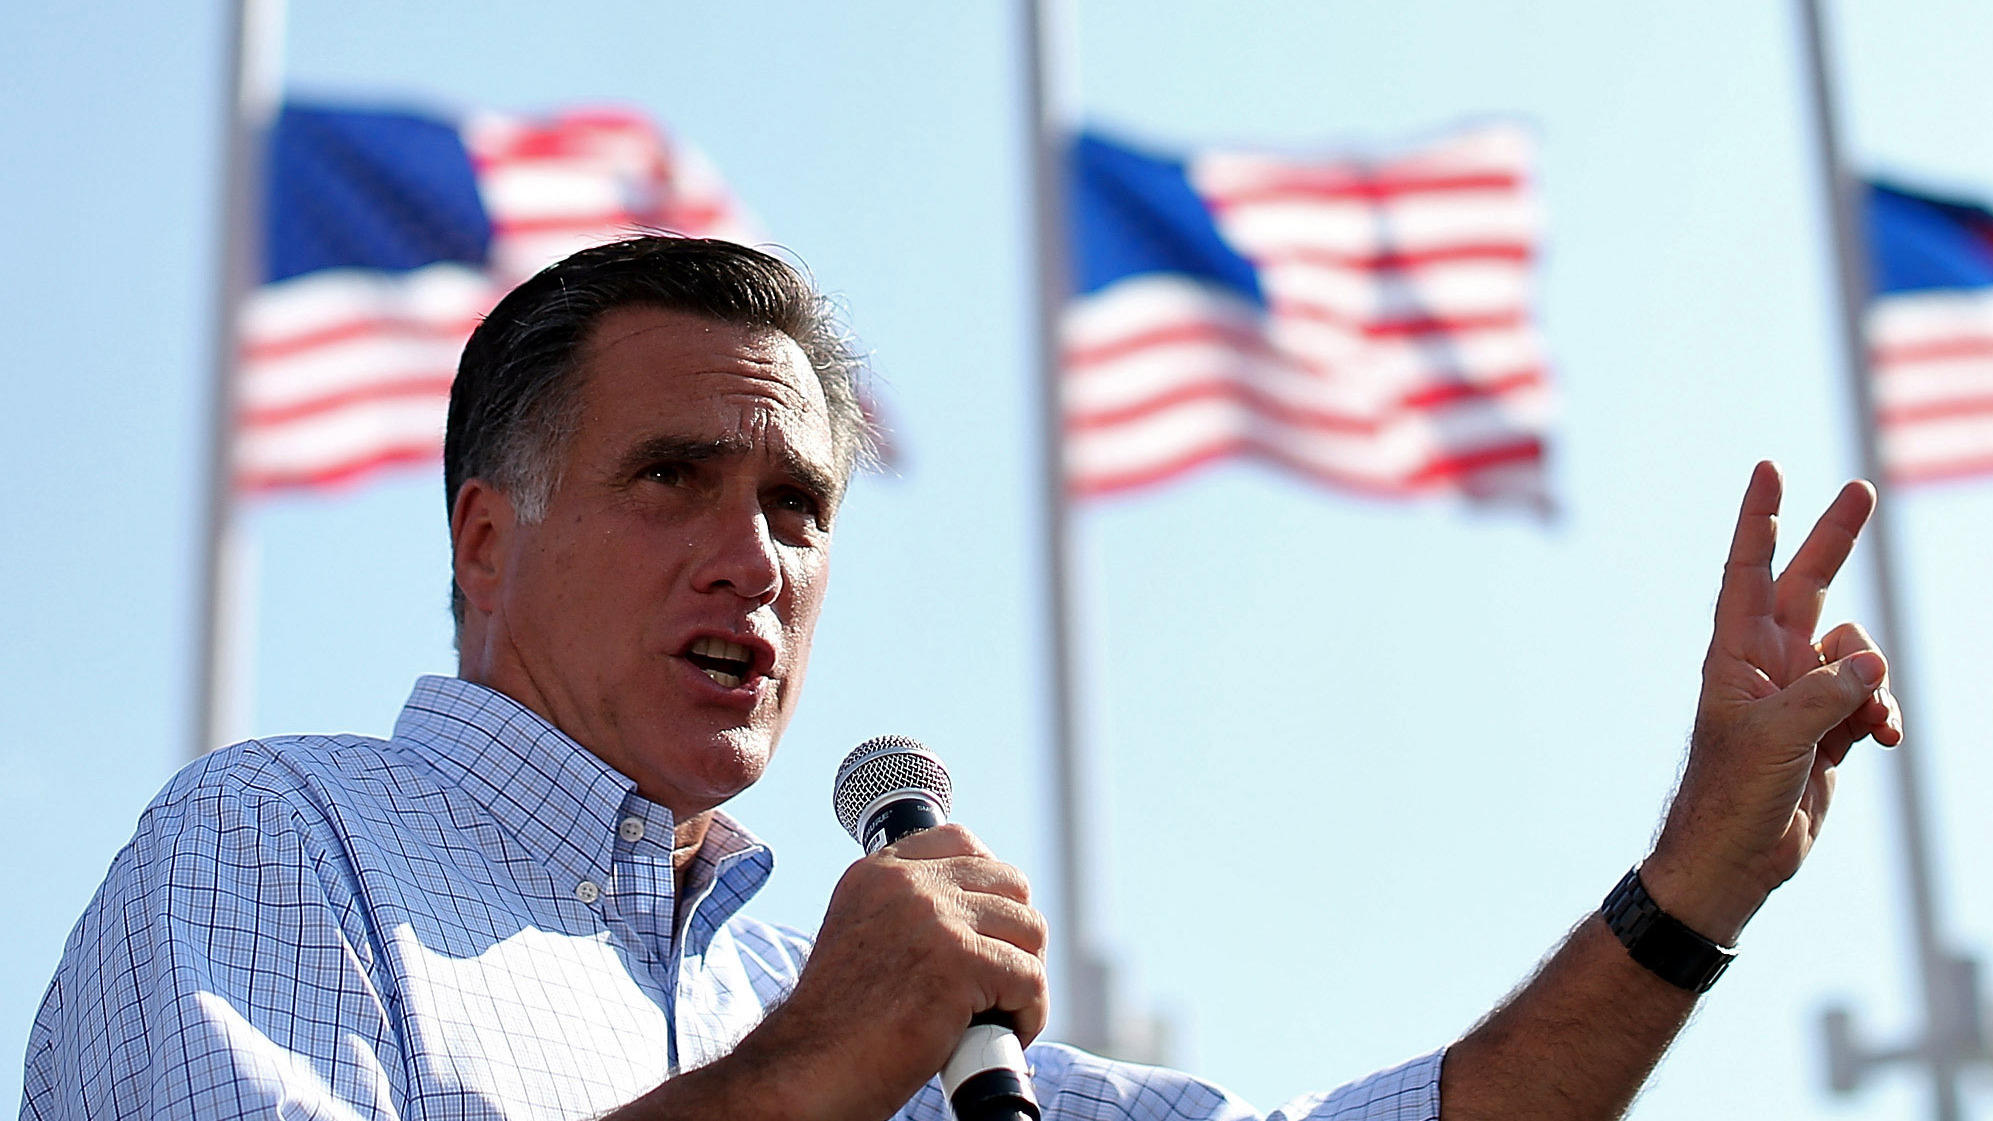 hacker holds romney tax returns ransom for 1m in bitcoins to usd